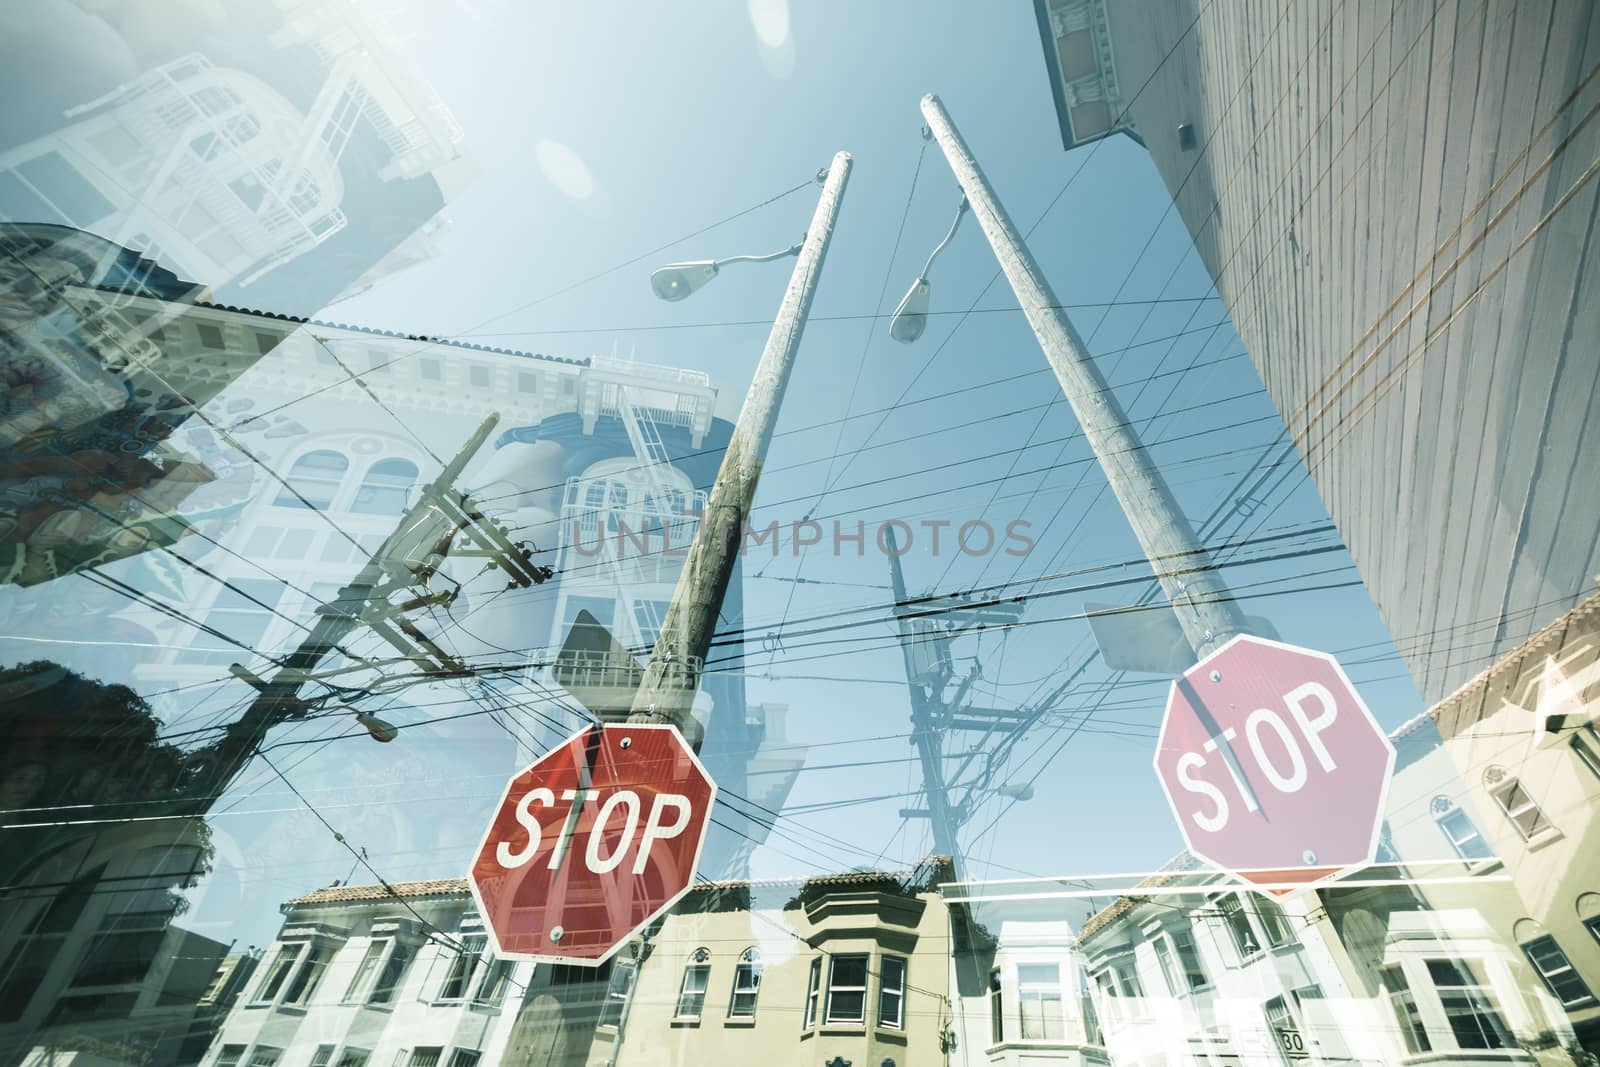 Double exposure photograph in the streets of San Francisco